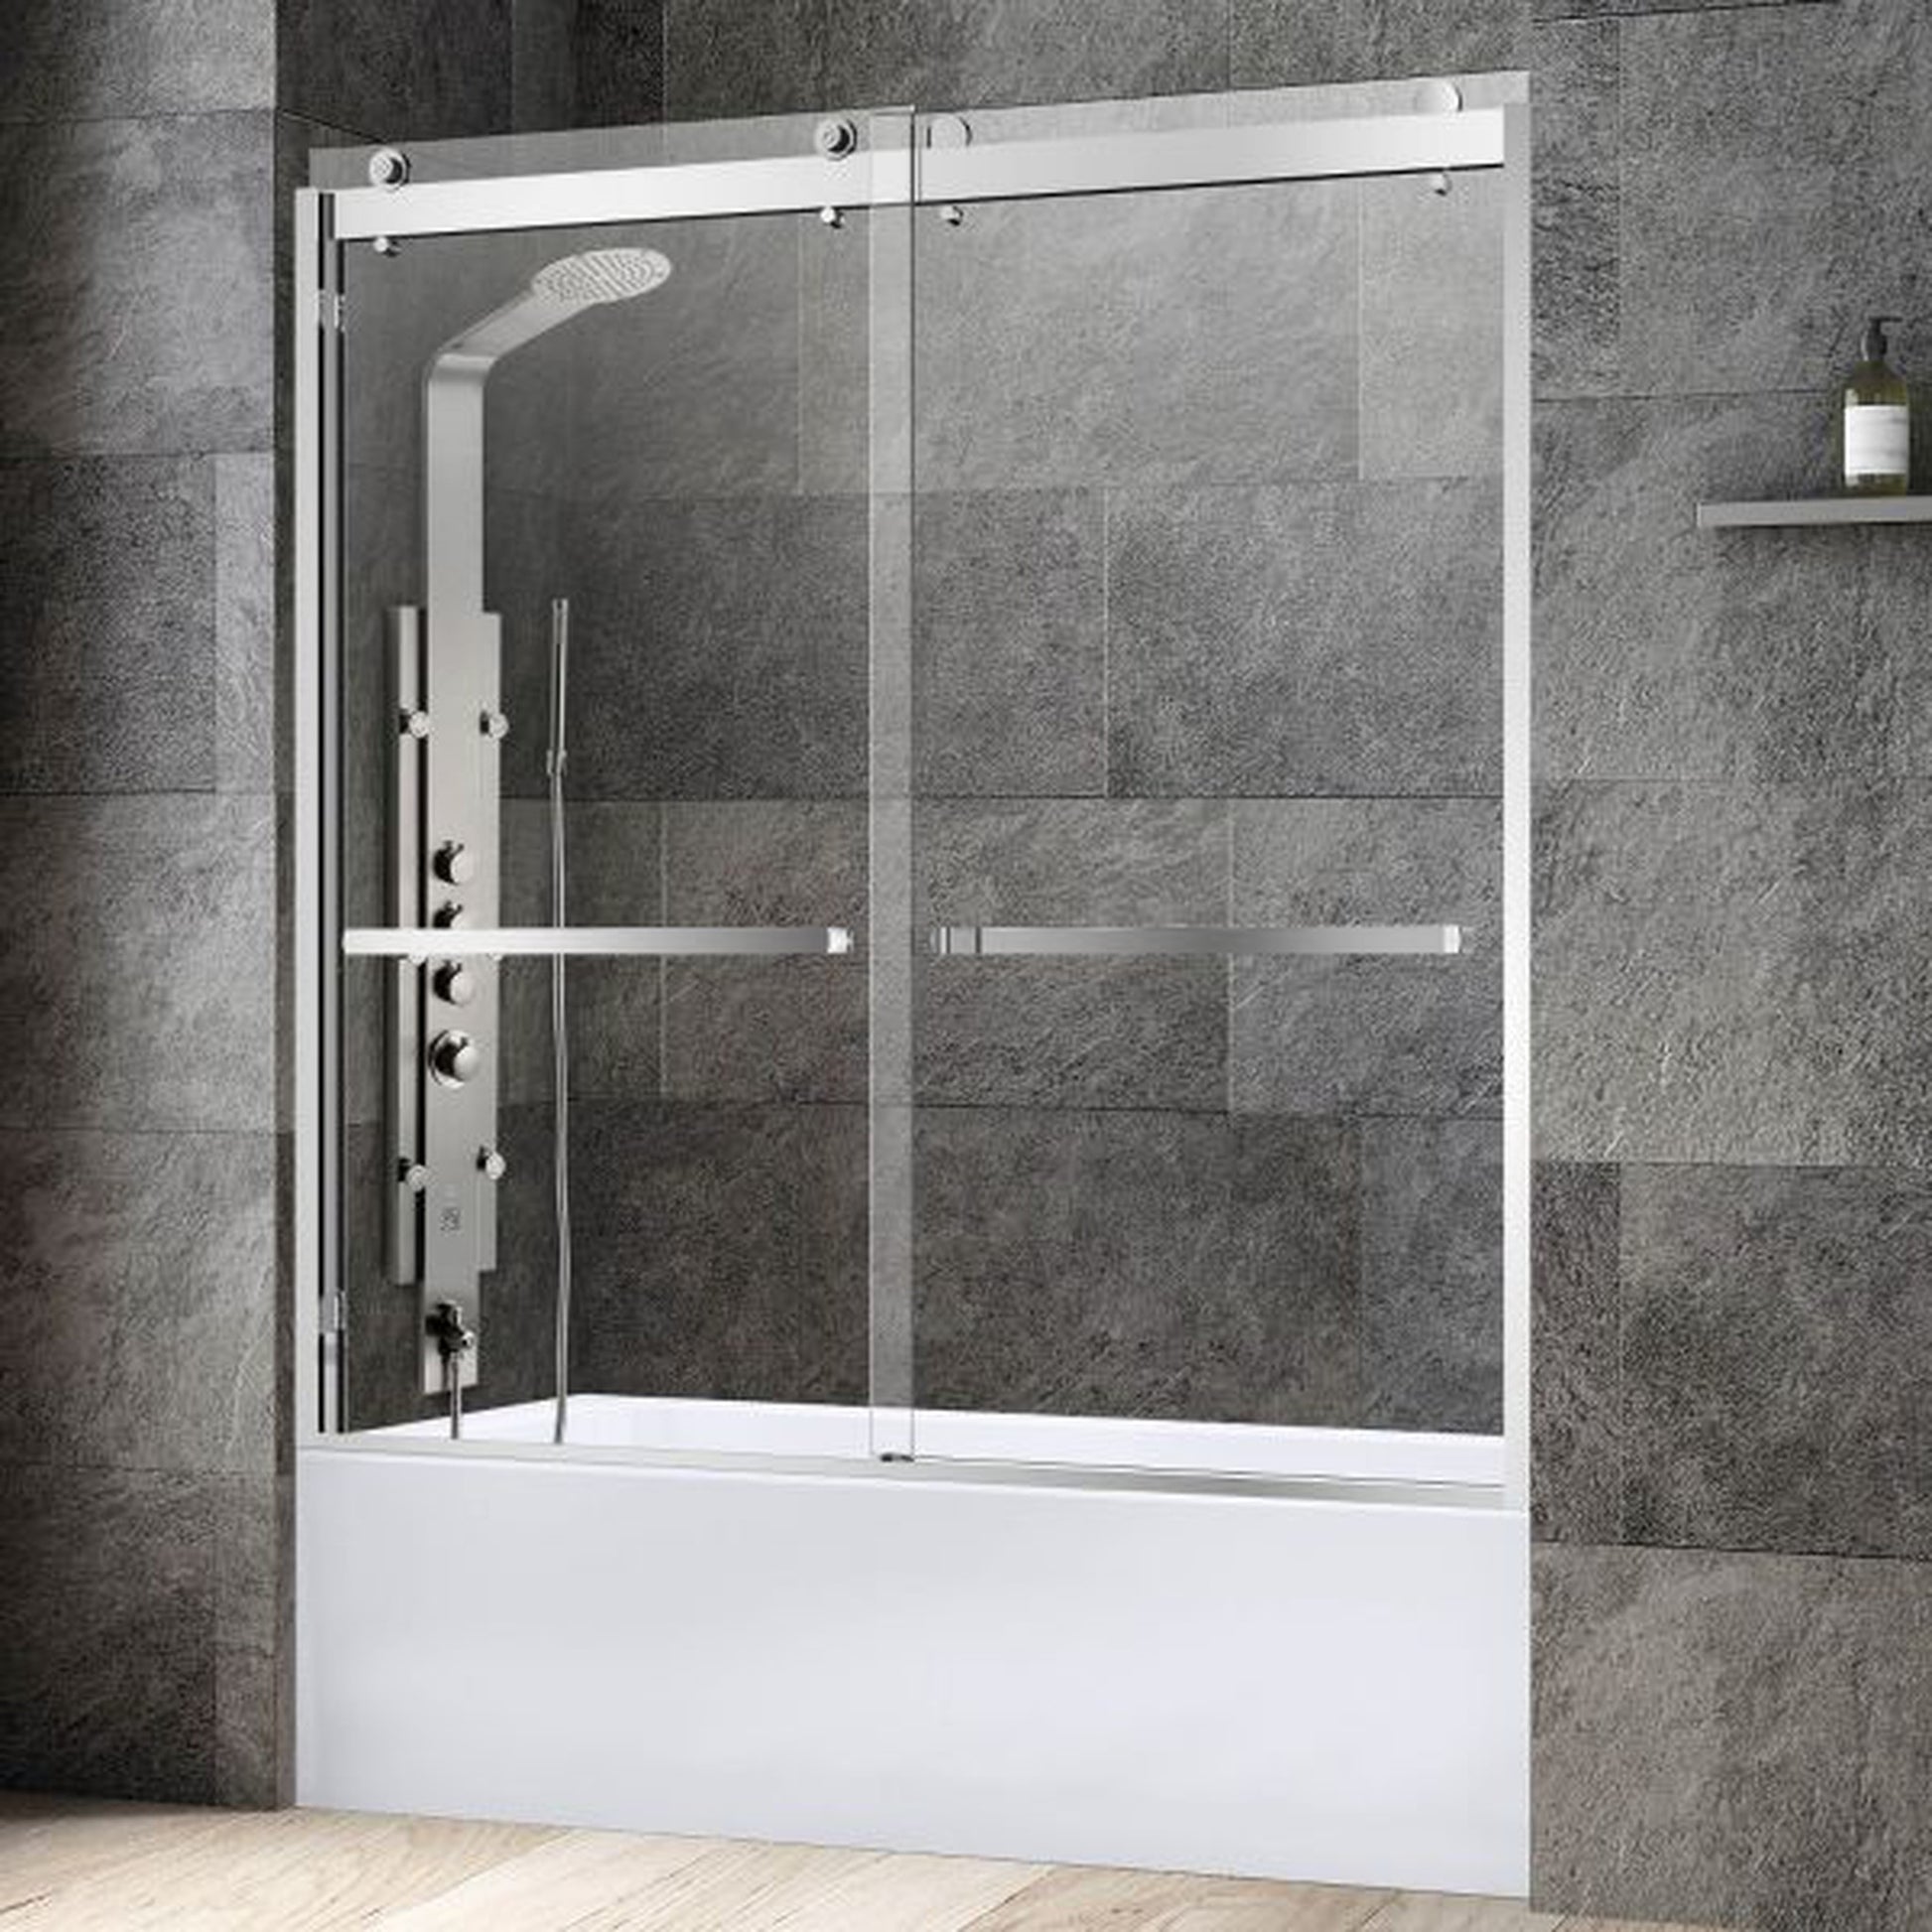 WoodBridge 60" W x 62" H Clear Tempered Glass 2-Way Opening and Double Sliding Frameless Shower Door With Brushed Nickel Hardware Finish